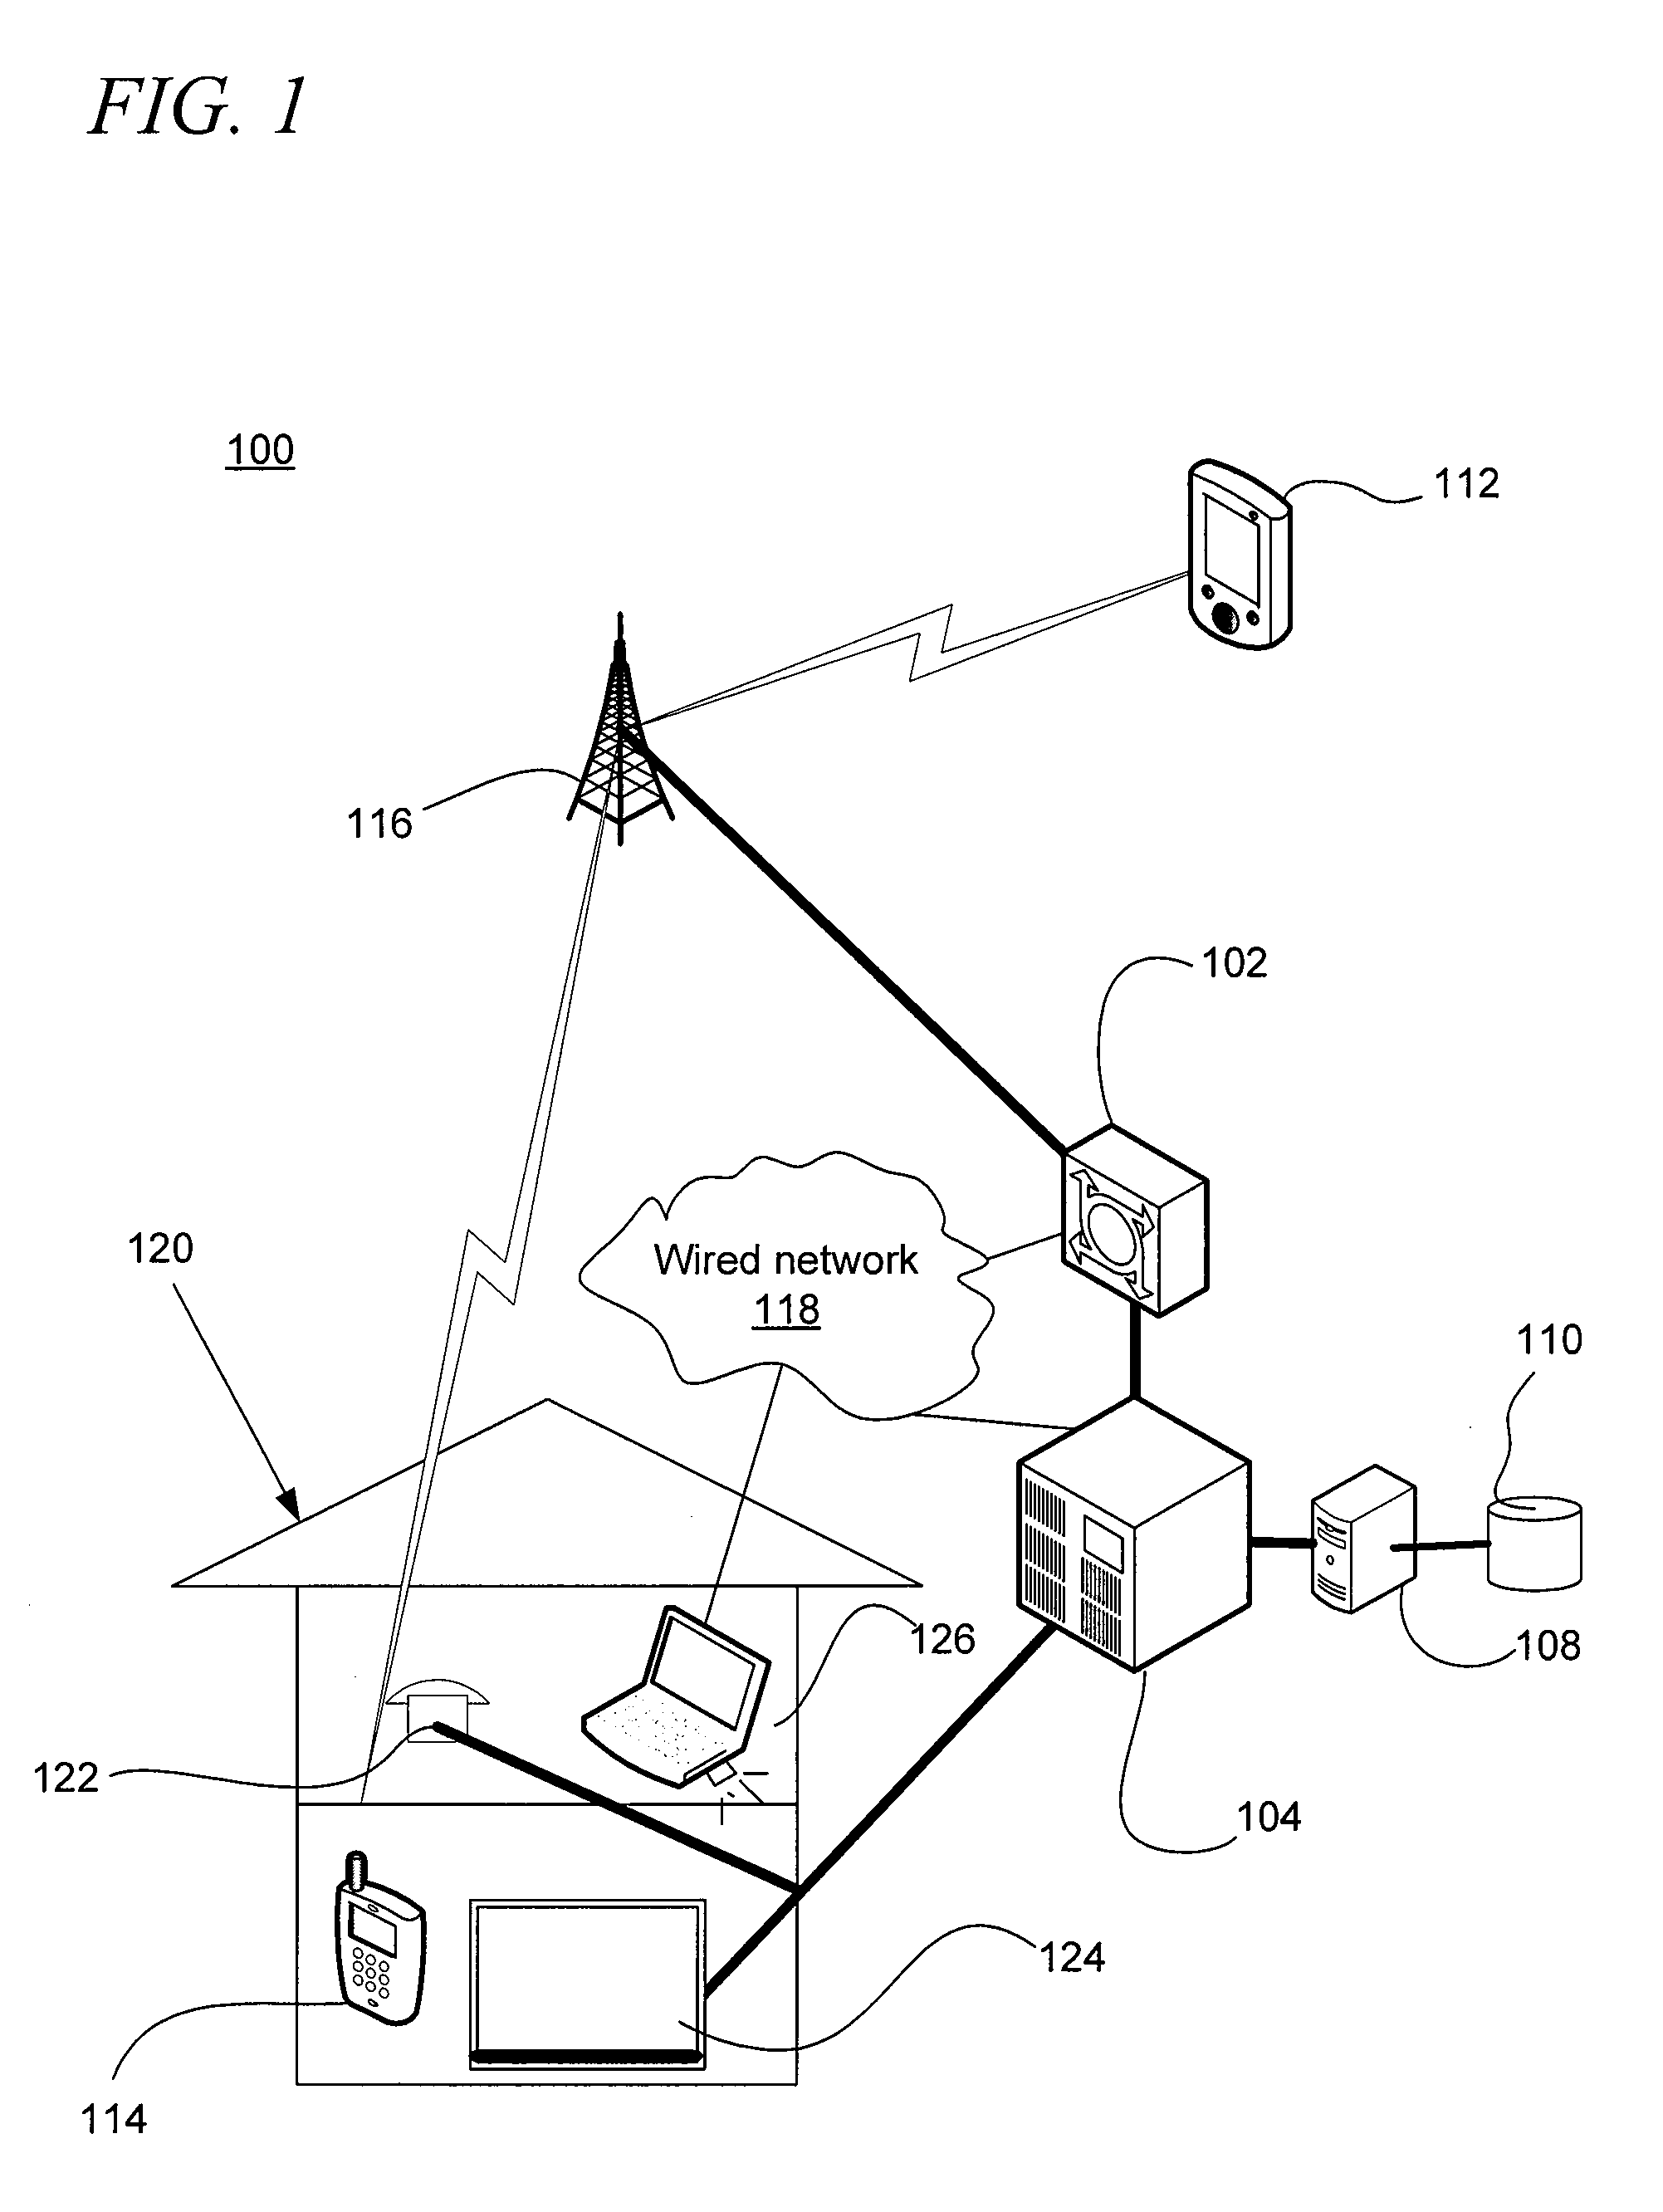 System and method for voice activated provisioning of telecommunication services